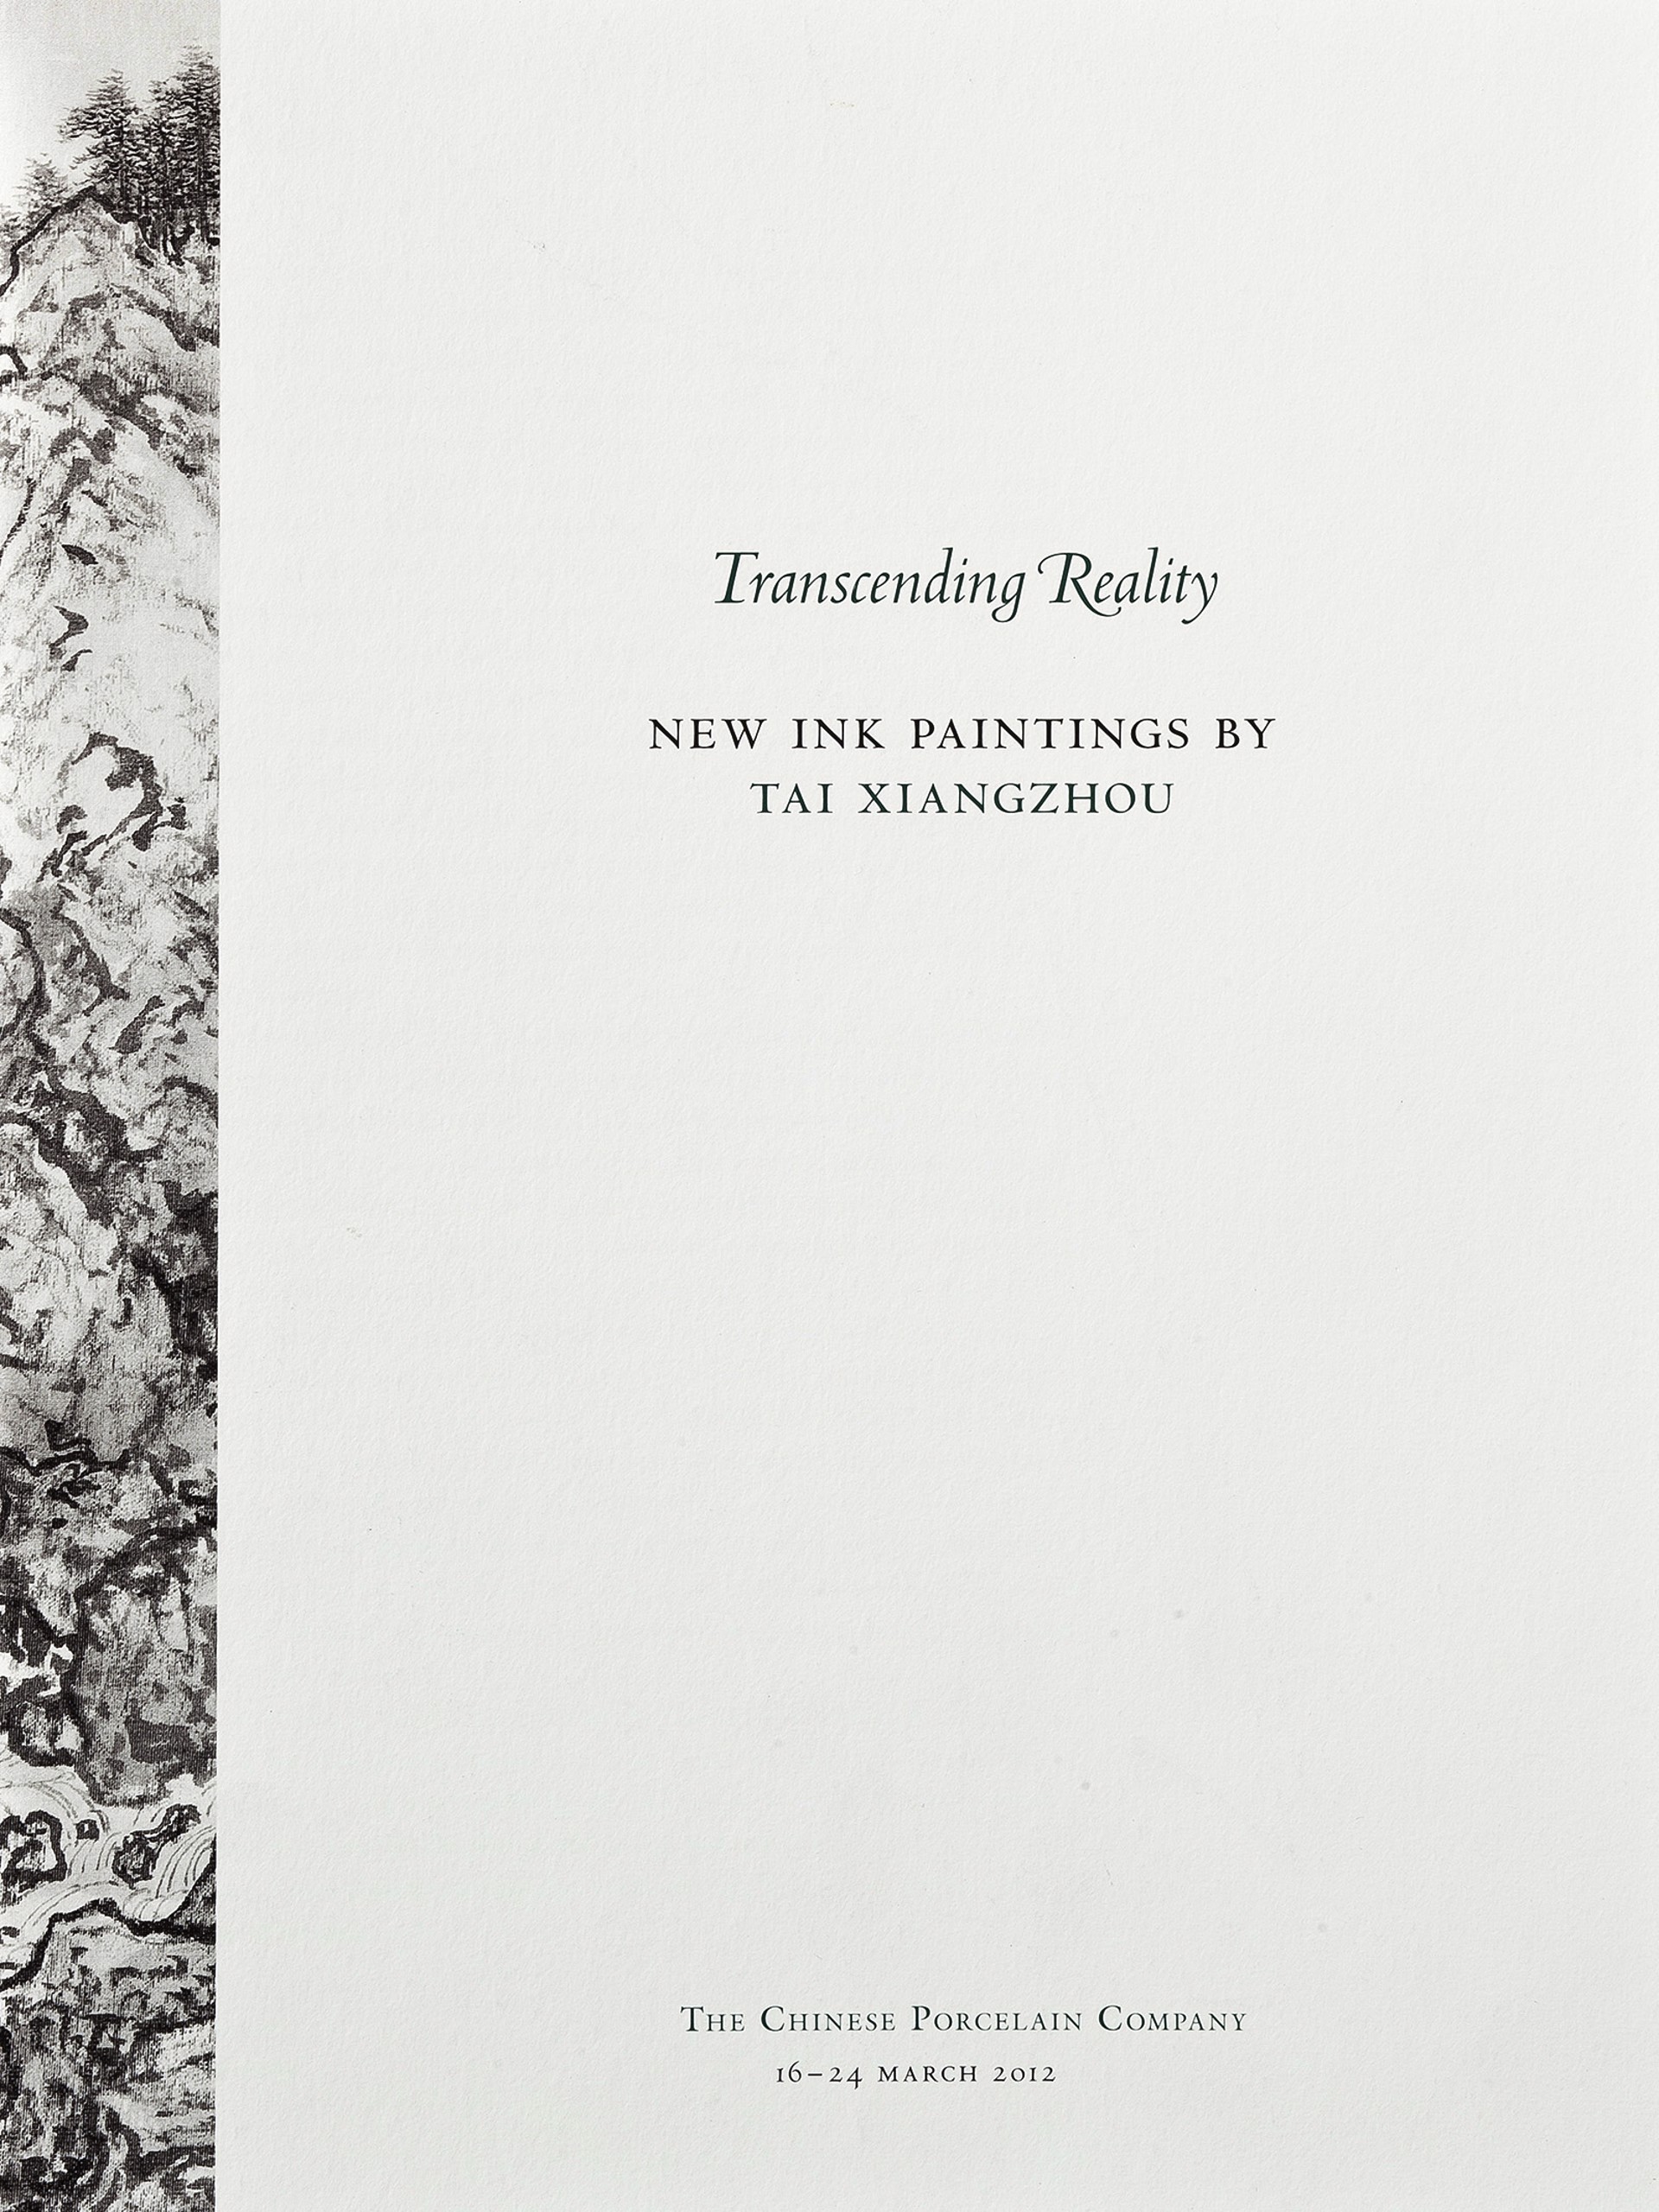 Tai Xiangzhou,Transcending Reality, New Ink Paintings  2012 by Brochure 15